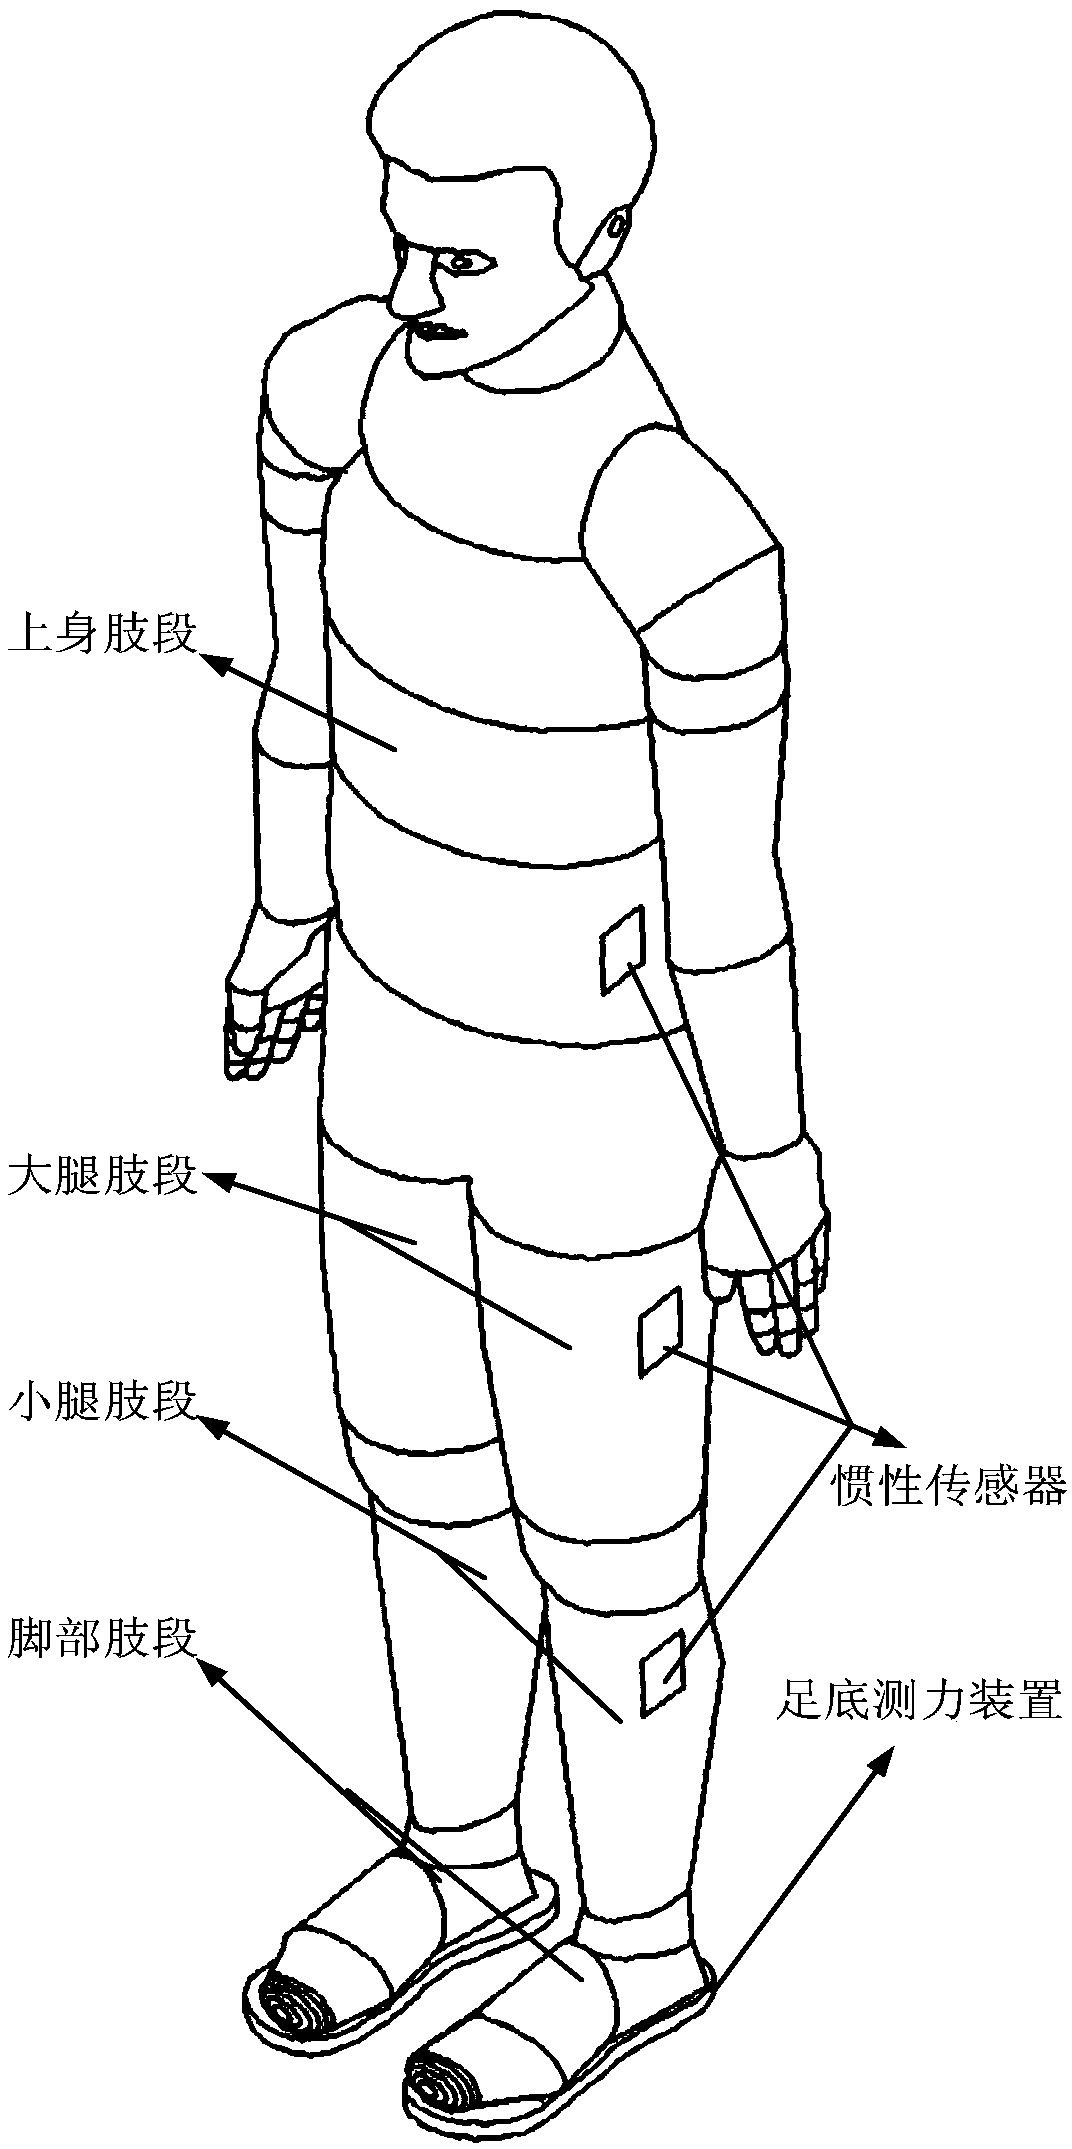 Standing up movement balance monitoring and dynamics analysis system